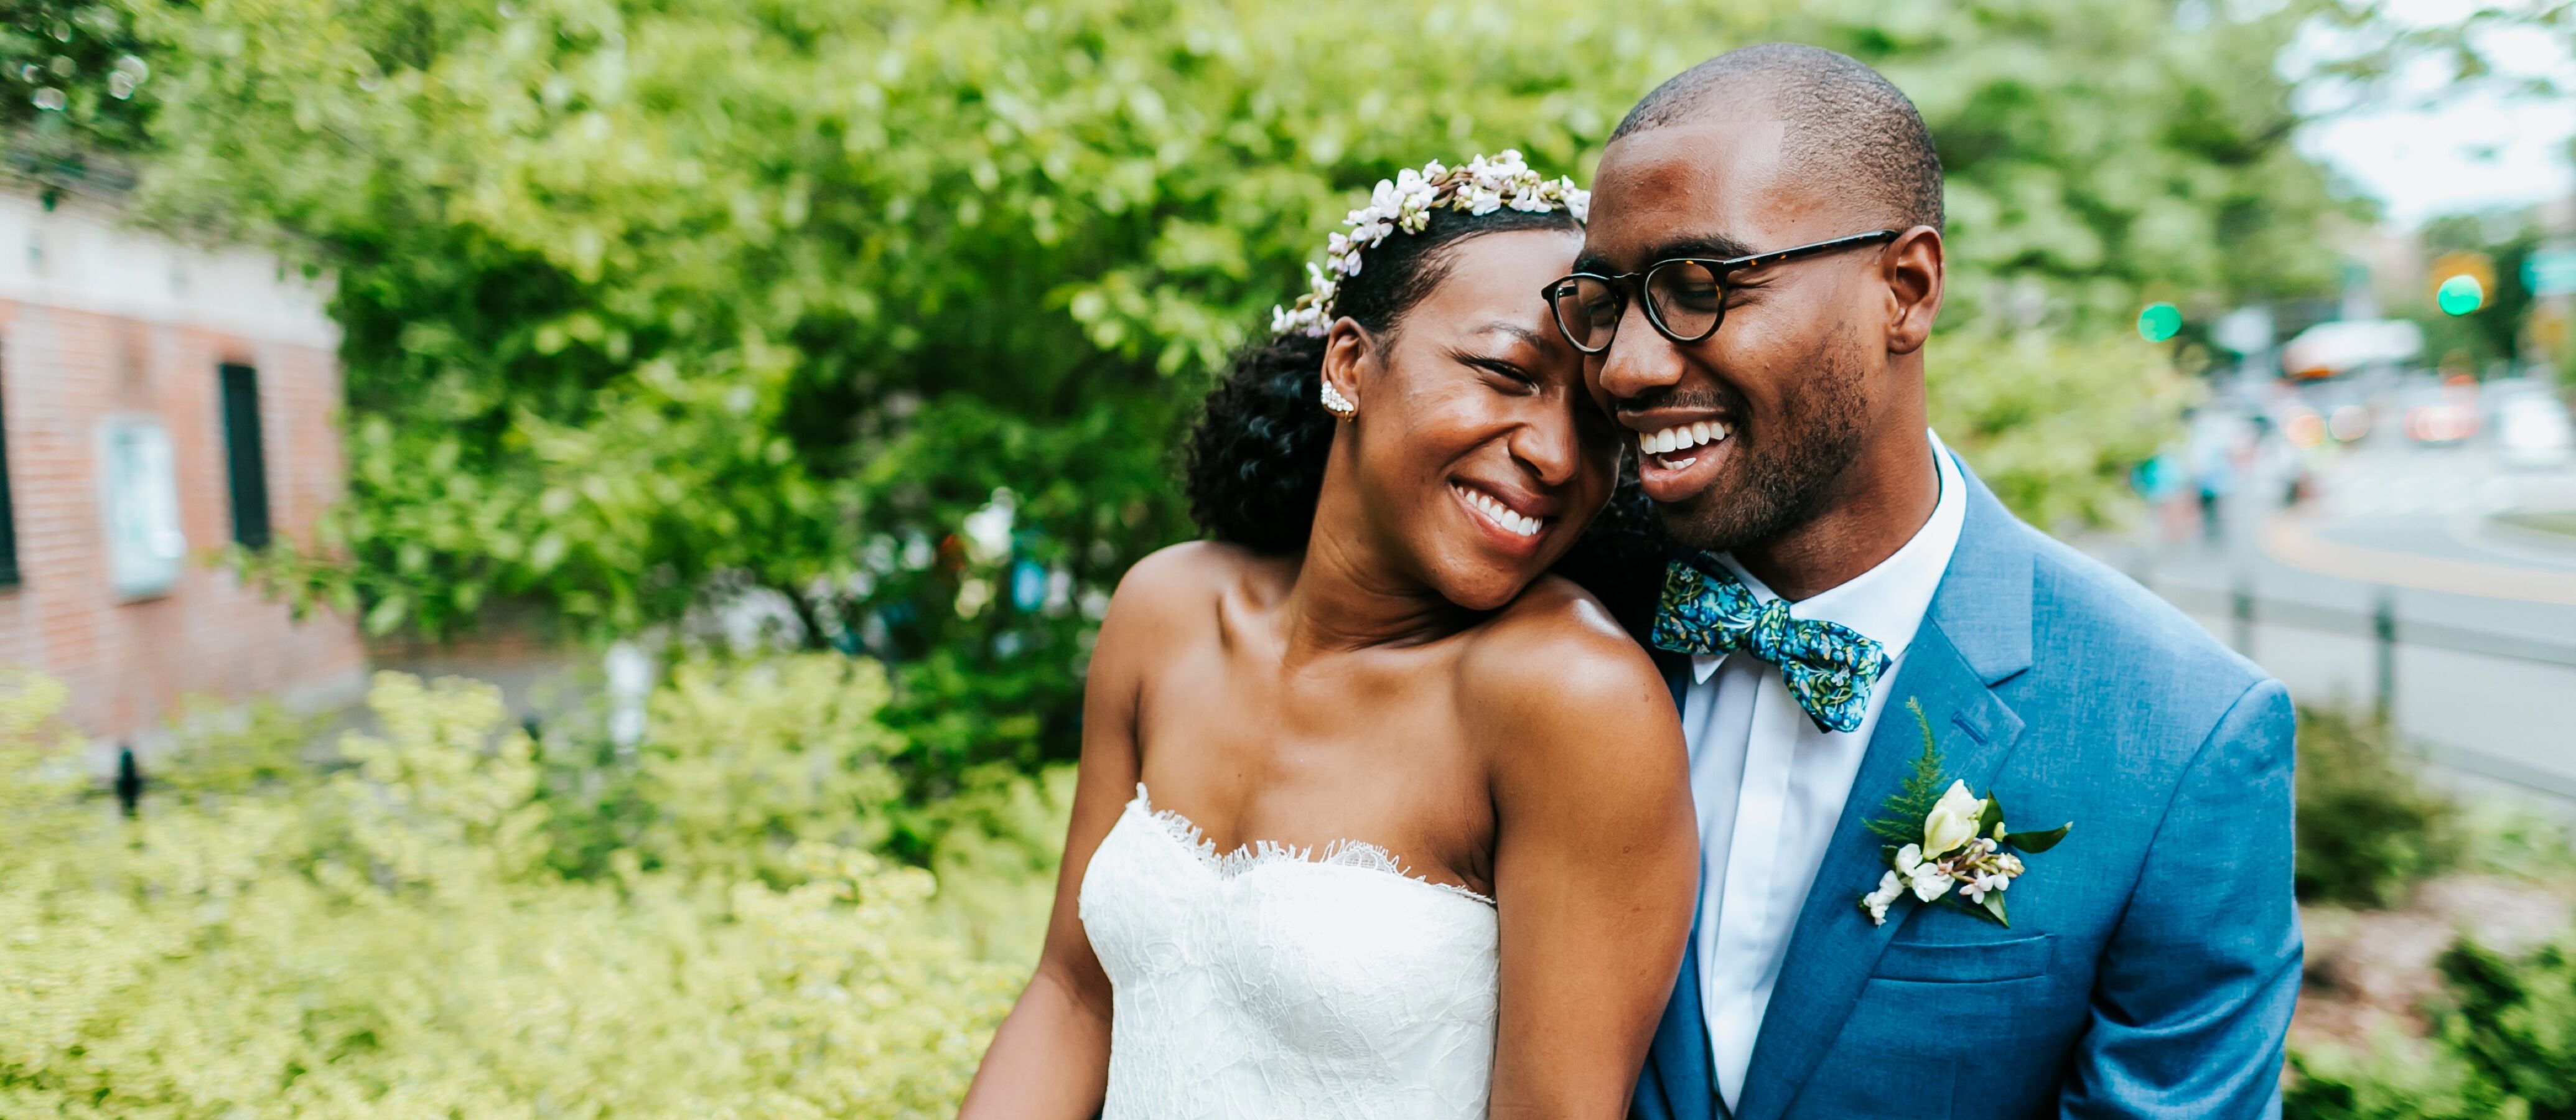 Wedding Photographers in Cambridge, MA - The Knot